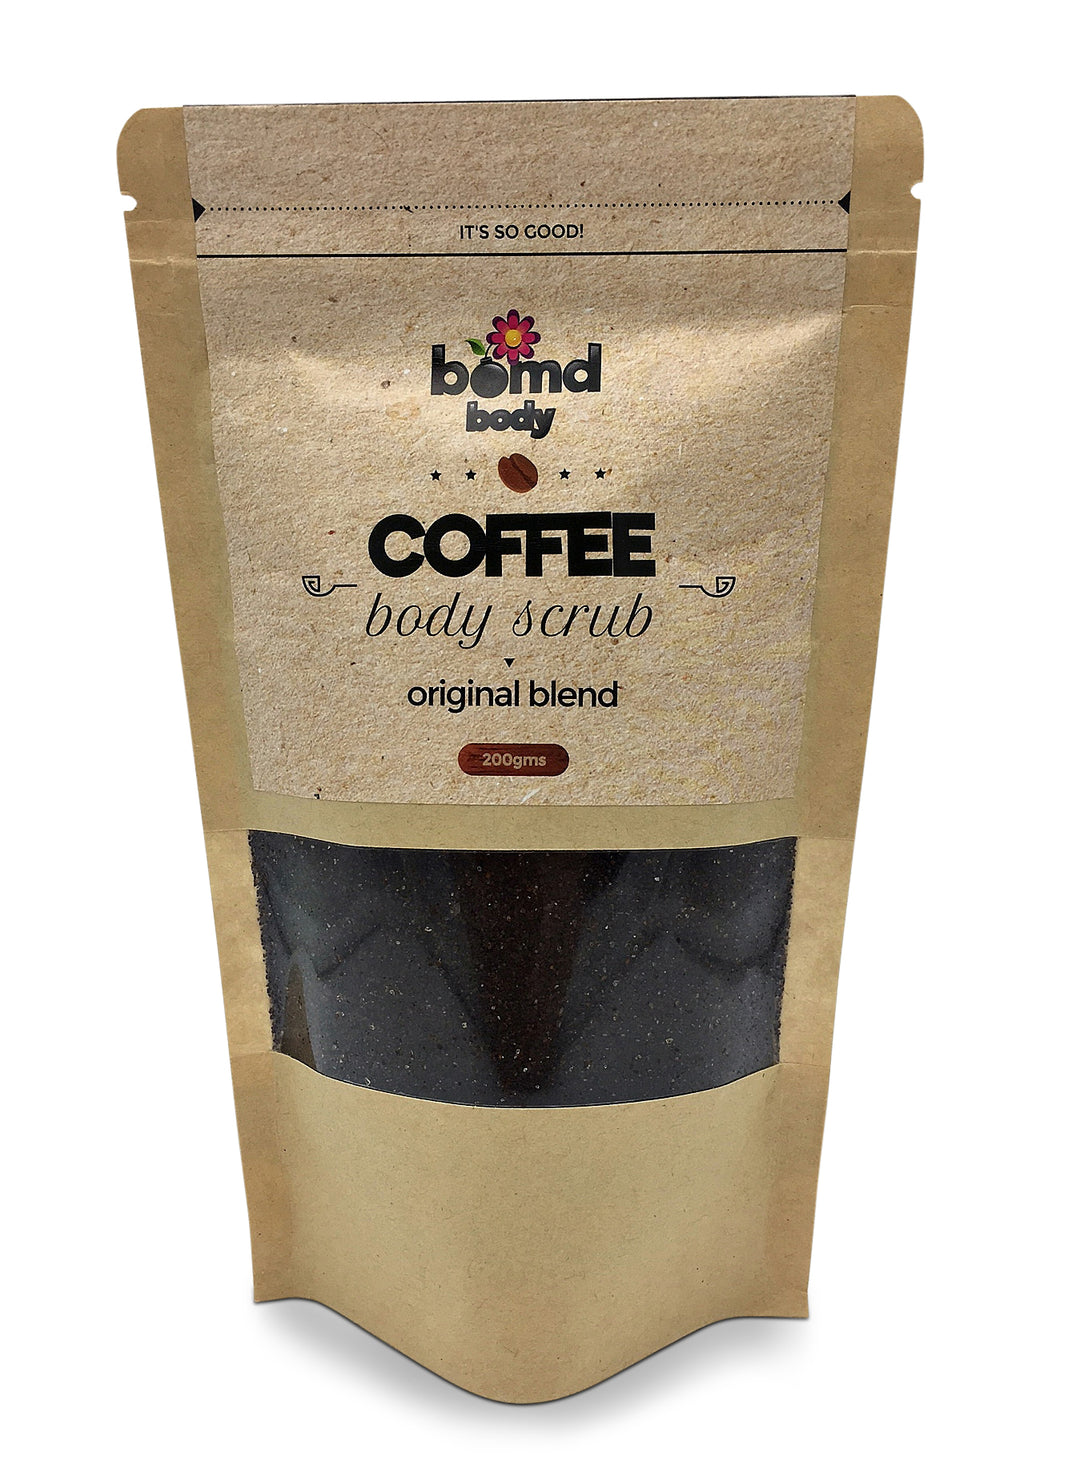 Original Coffee Body Scrub with Added Vitamin E and Coconut Oil with Sea Salt By Bomd Body 200gm Pack